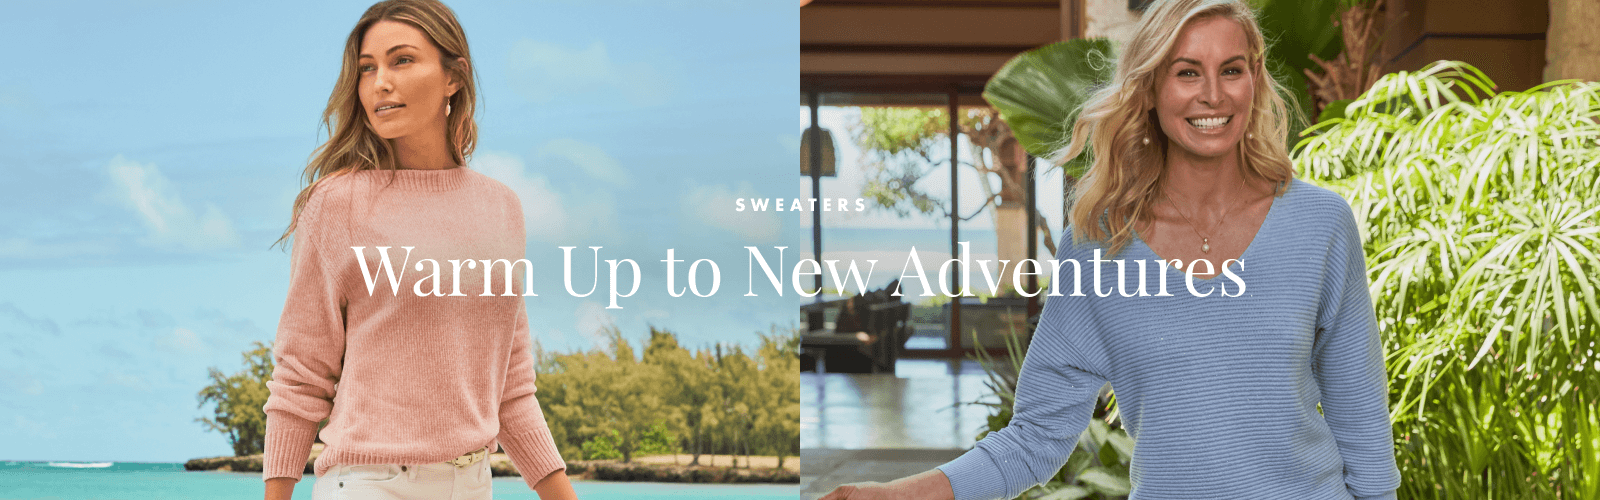 Sweaters: Warm Up to New Adventures